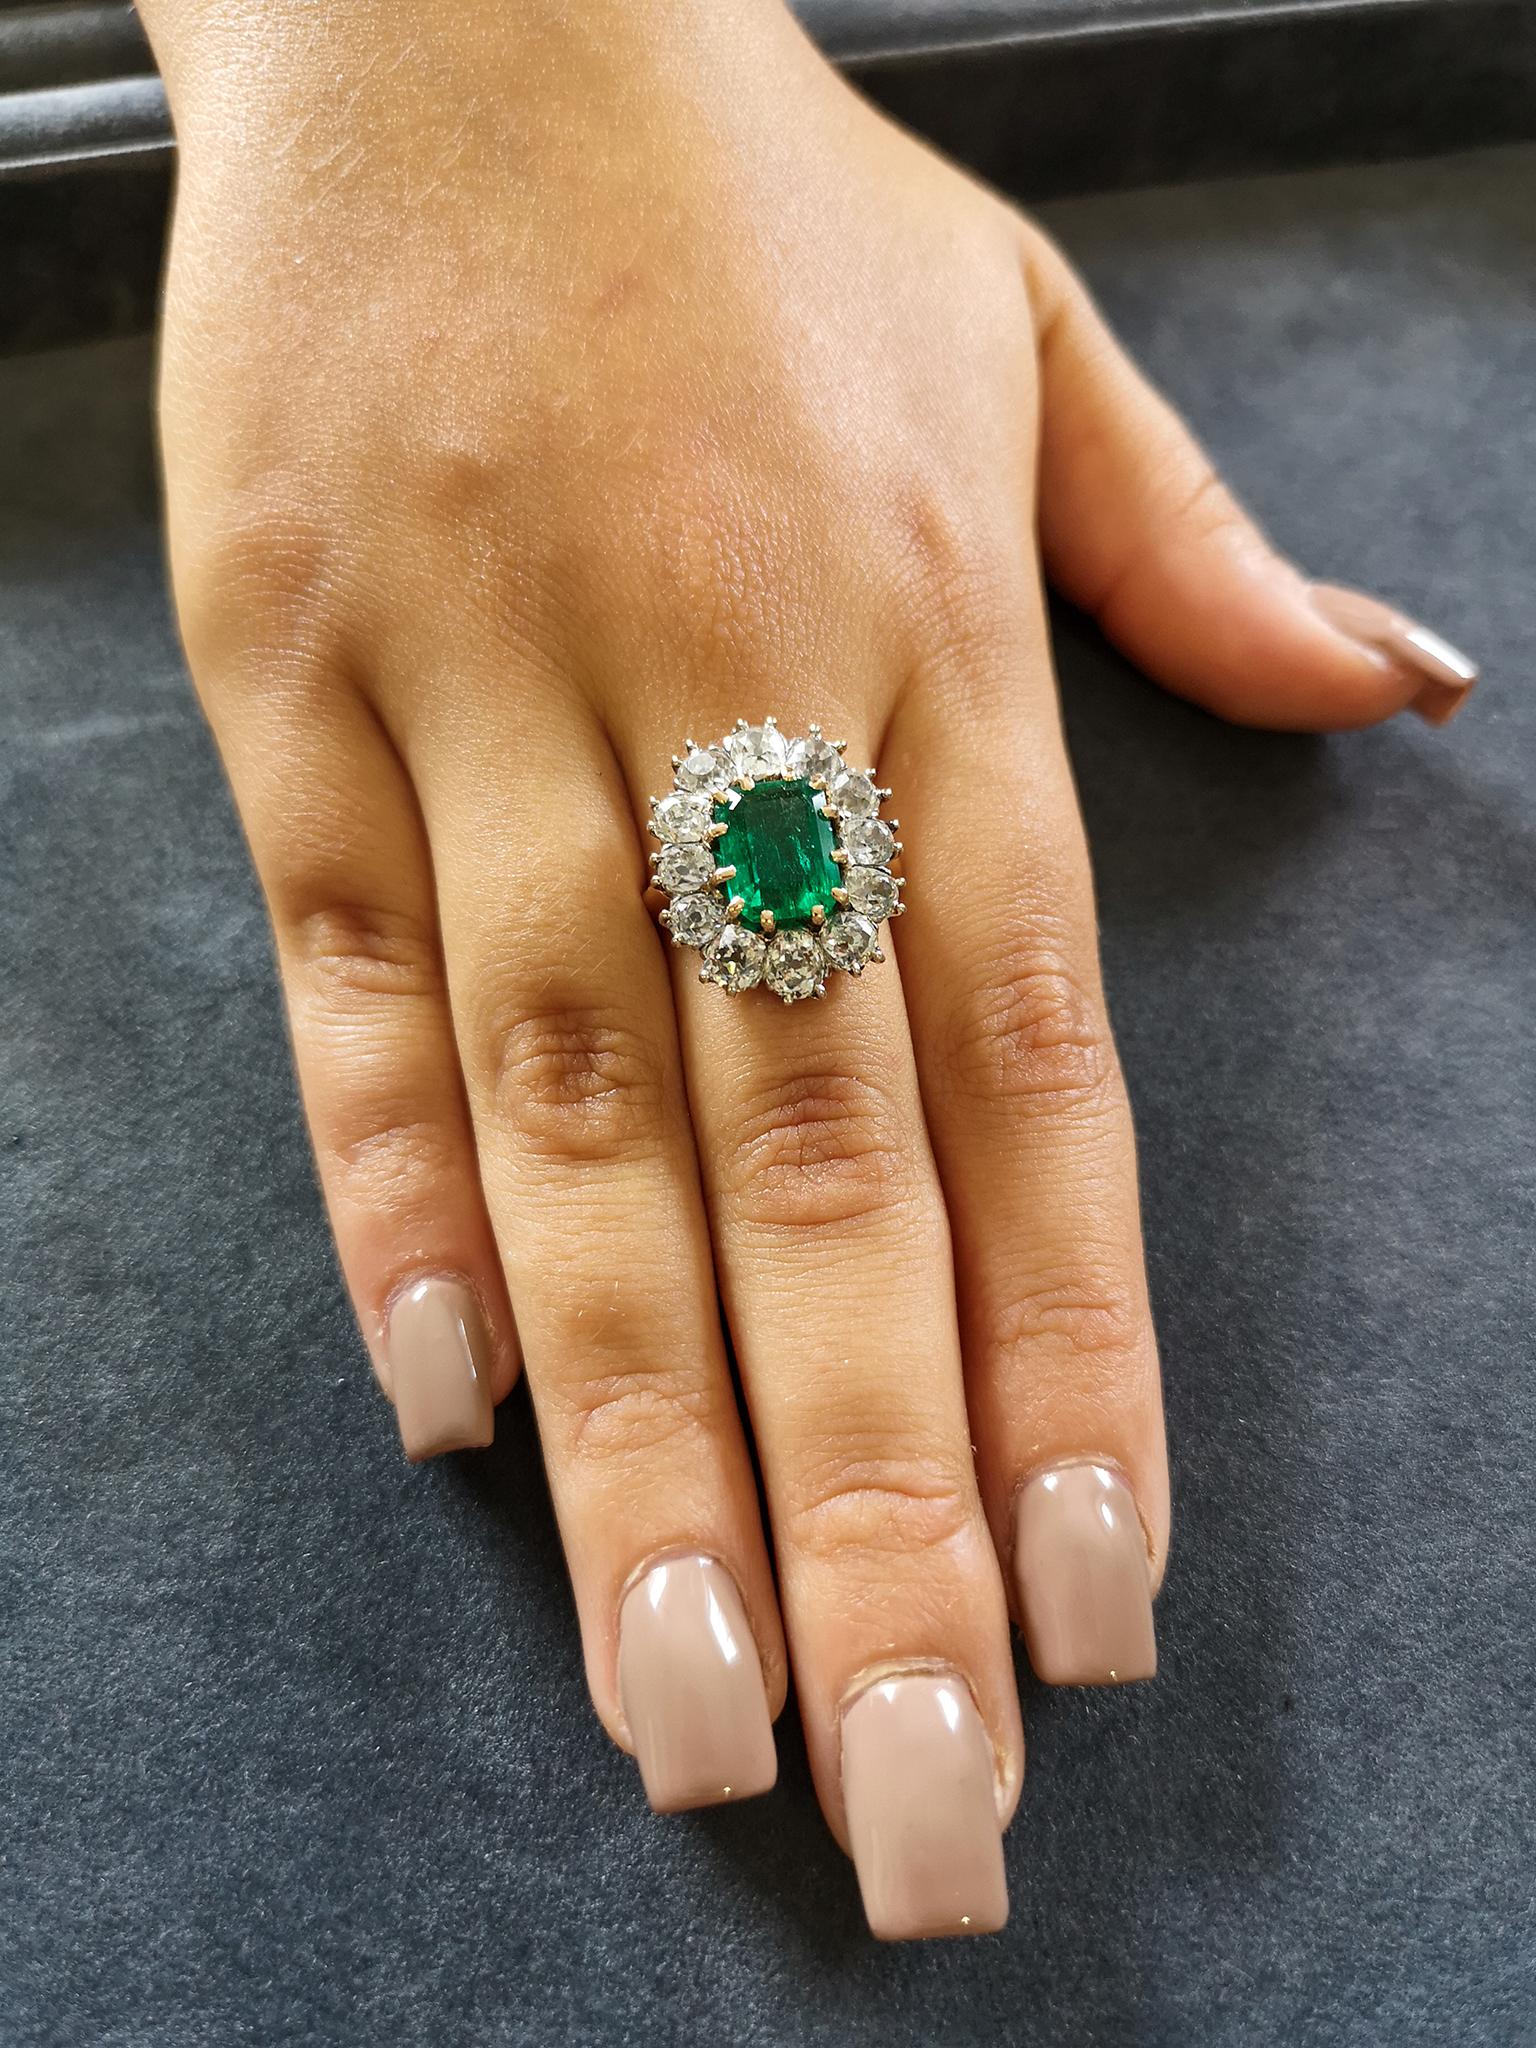 An exquisite, luscious deep-green emerald cut Colombian emerald of approximately 2.50 carats mounted in traditional 18-carat yellow gold claws, surrounded by 12 chunky, sparkling old mine-cut diamonds, totaling approximately 3.60 carats, H colour SI